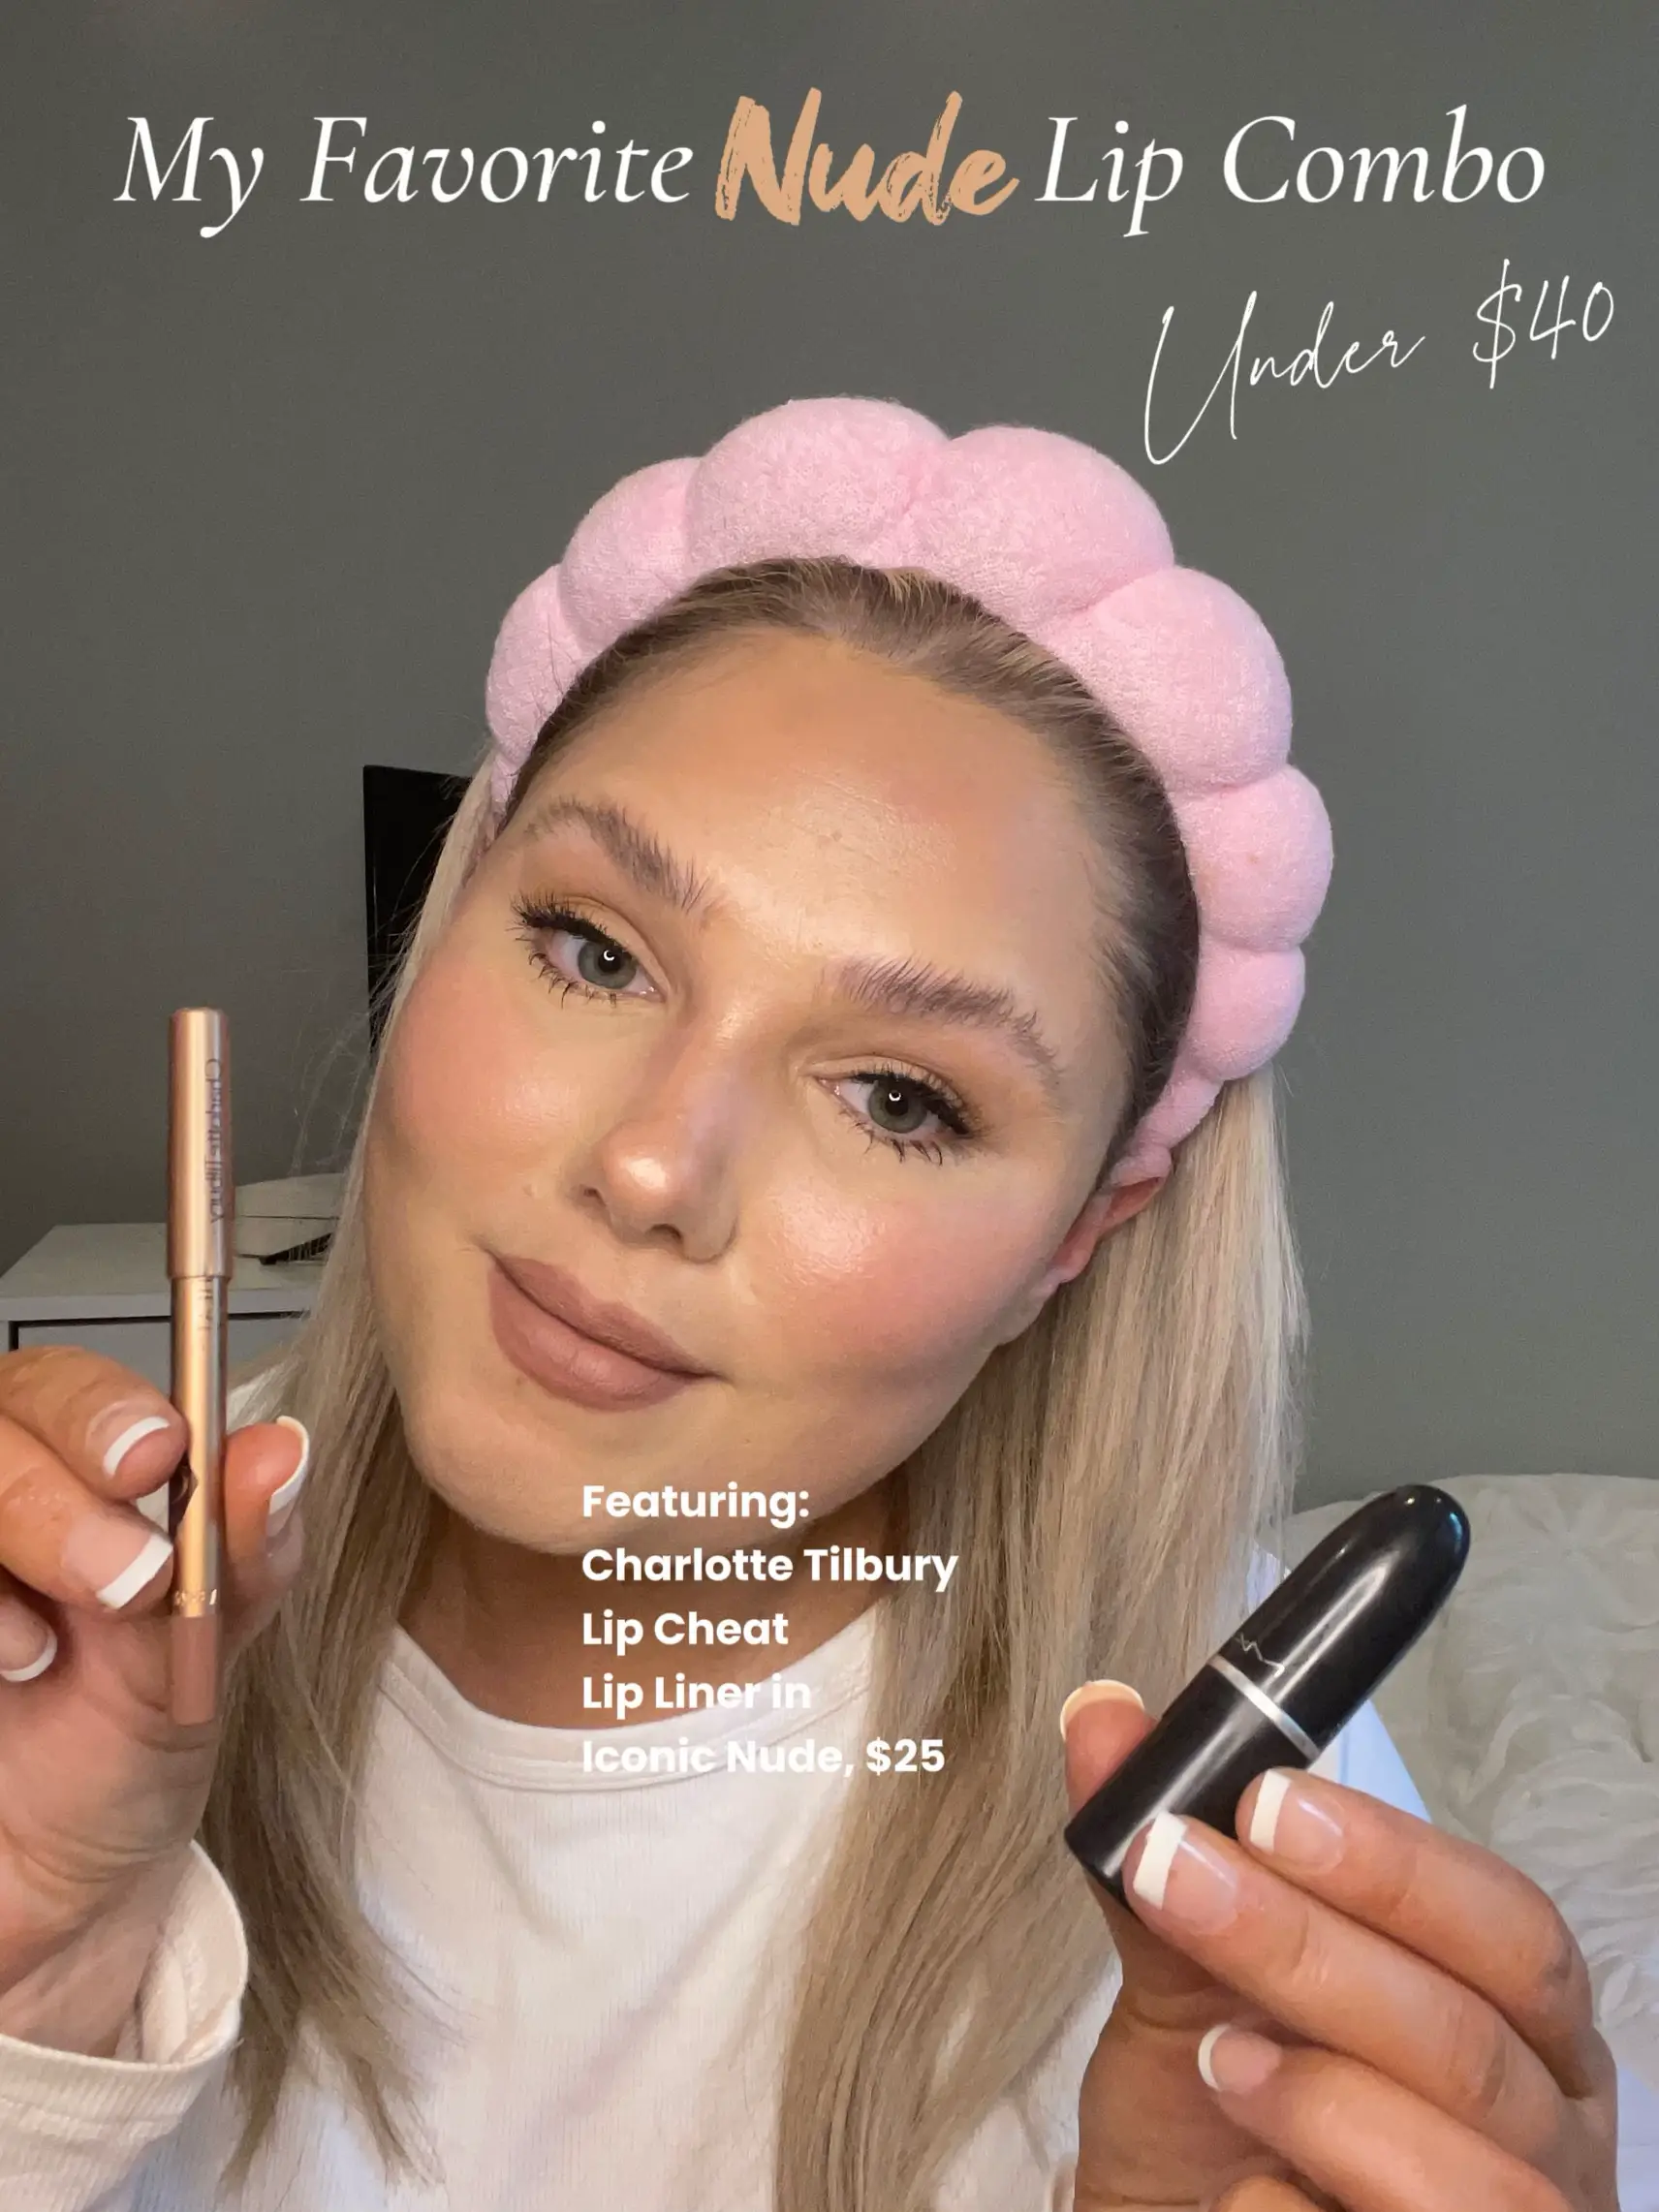 MY FAVORITE CHANEL 'NUDE' LIPSTICKS and LIP COMBOS